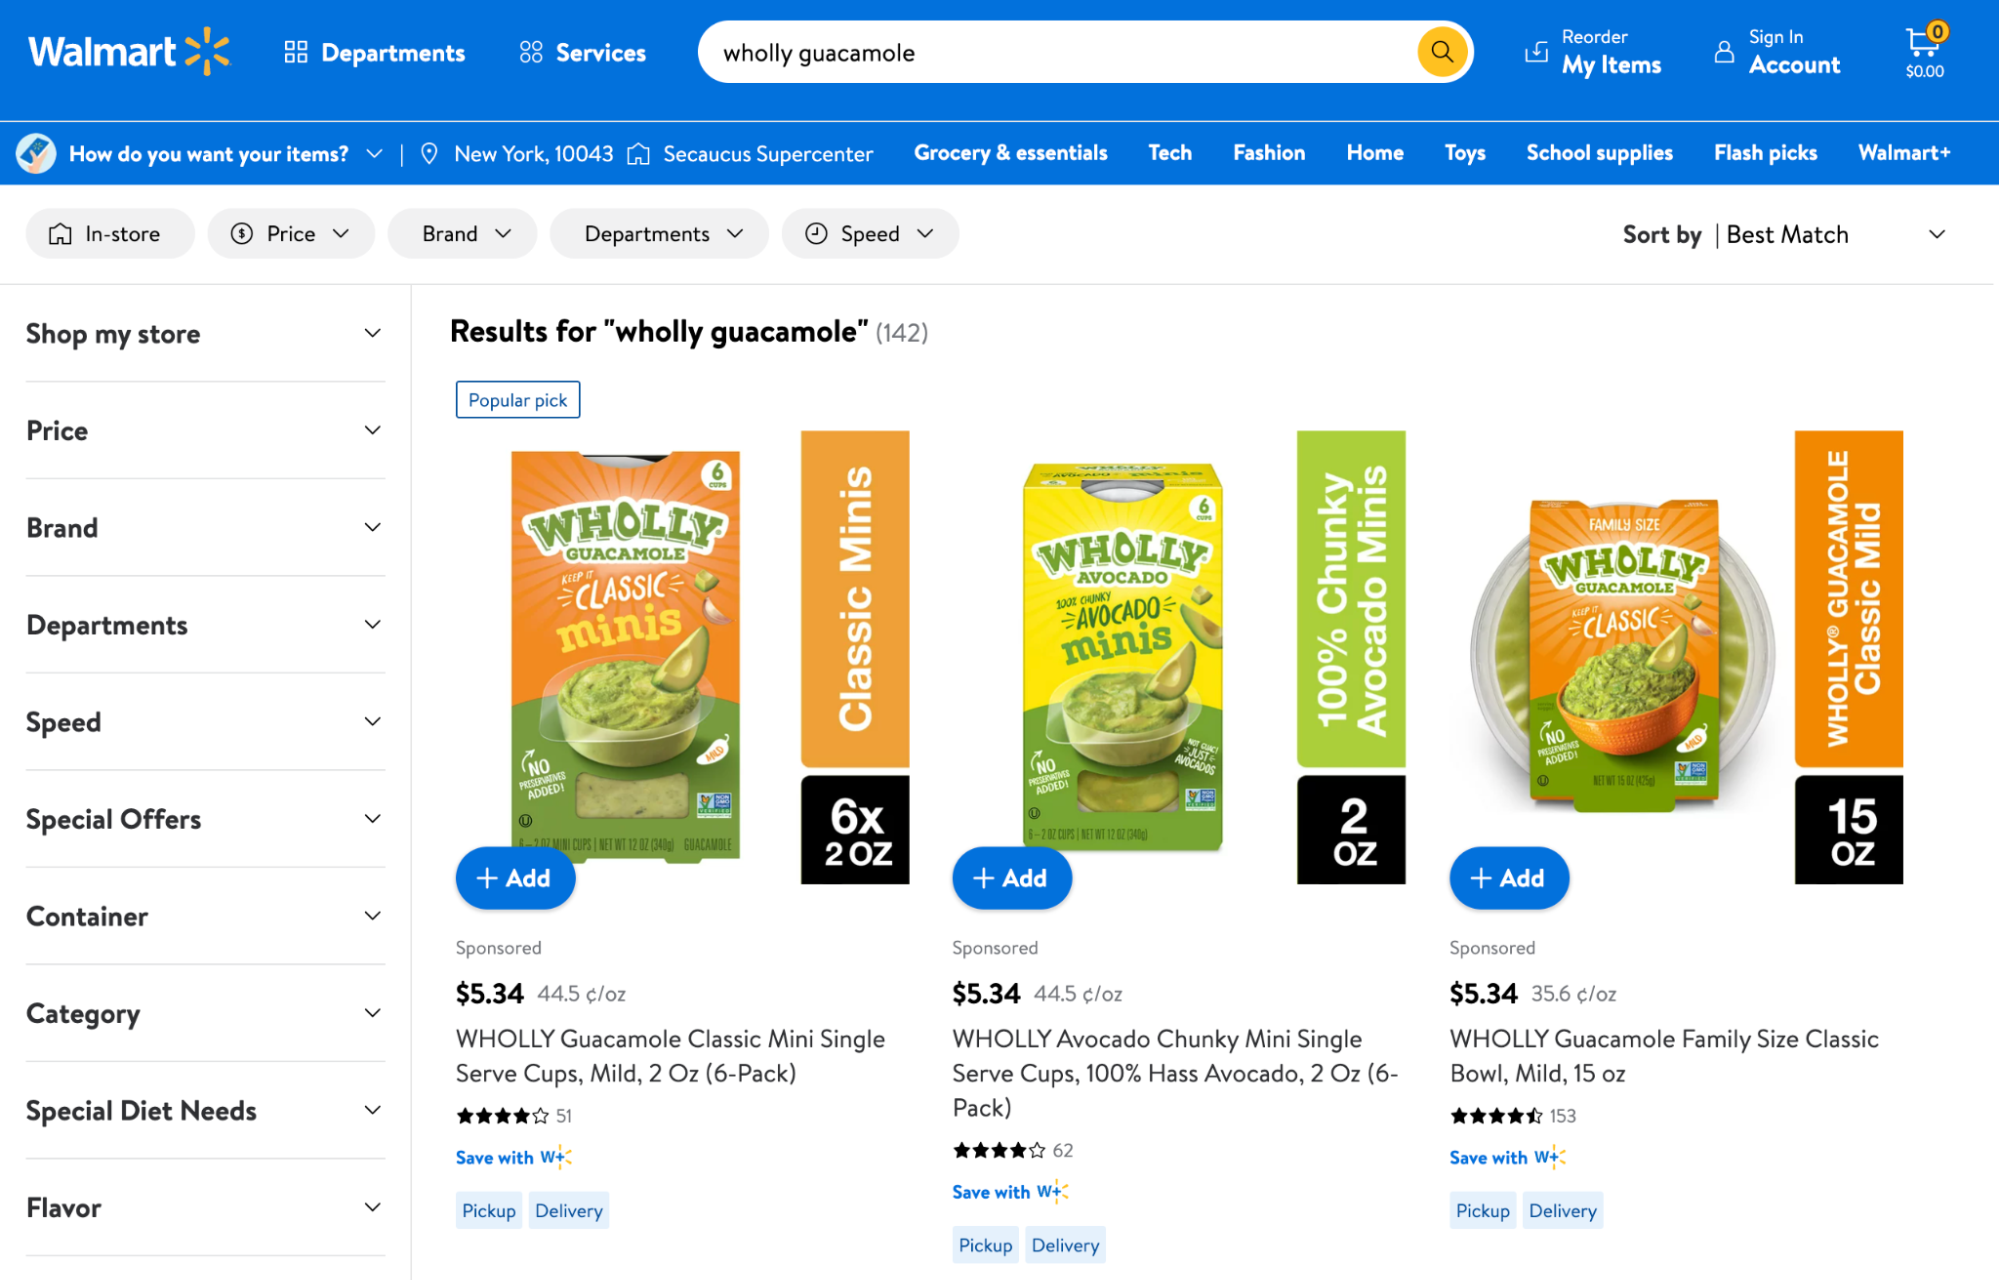 Walmart search results food and beverage ecommerce trends food and beverage ecommerce